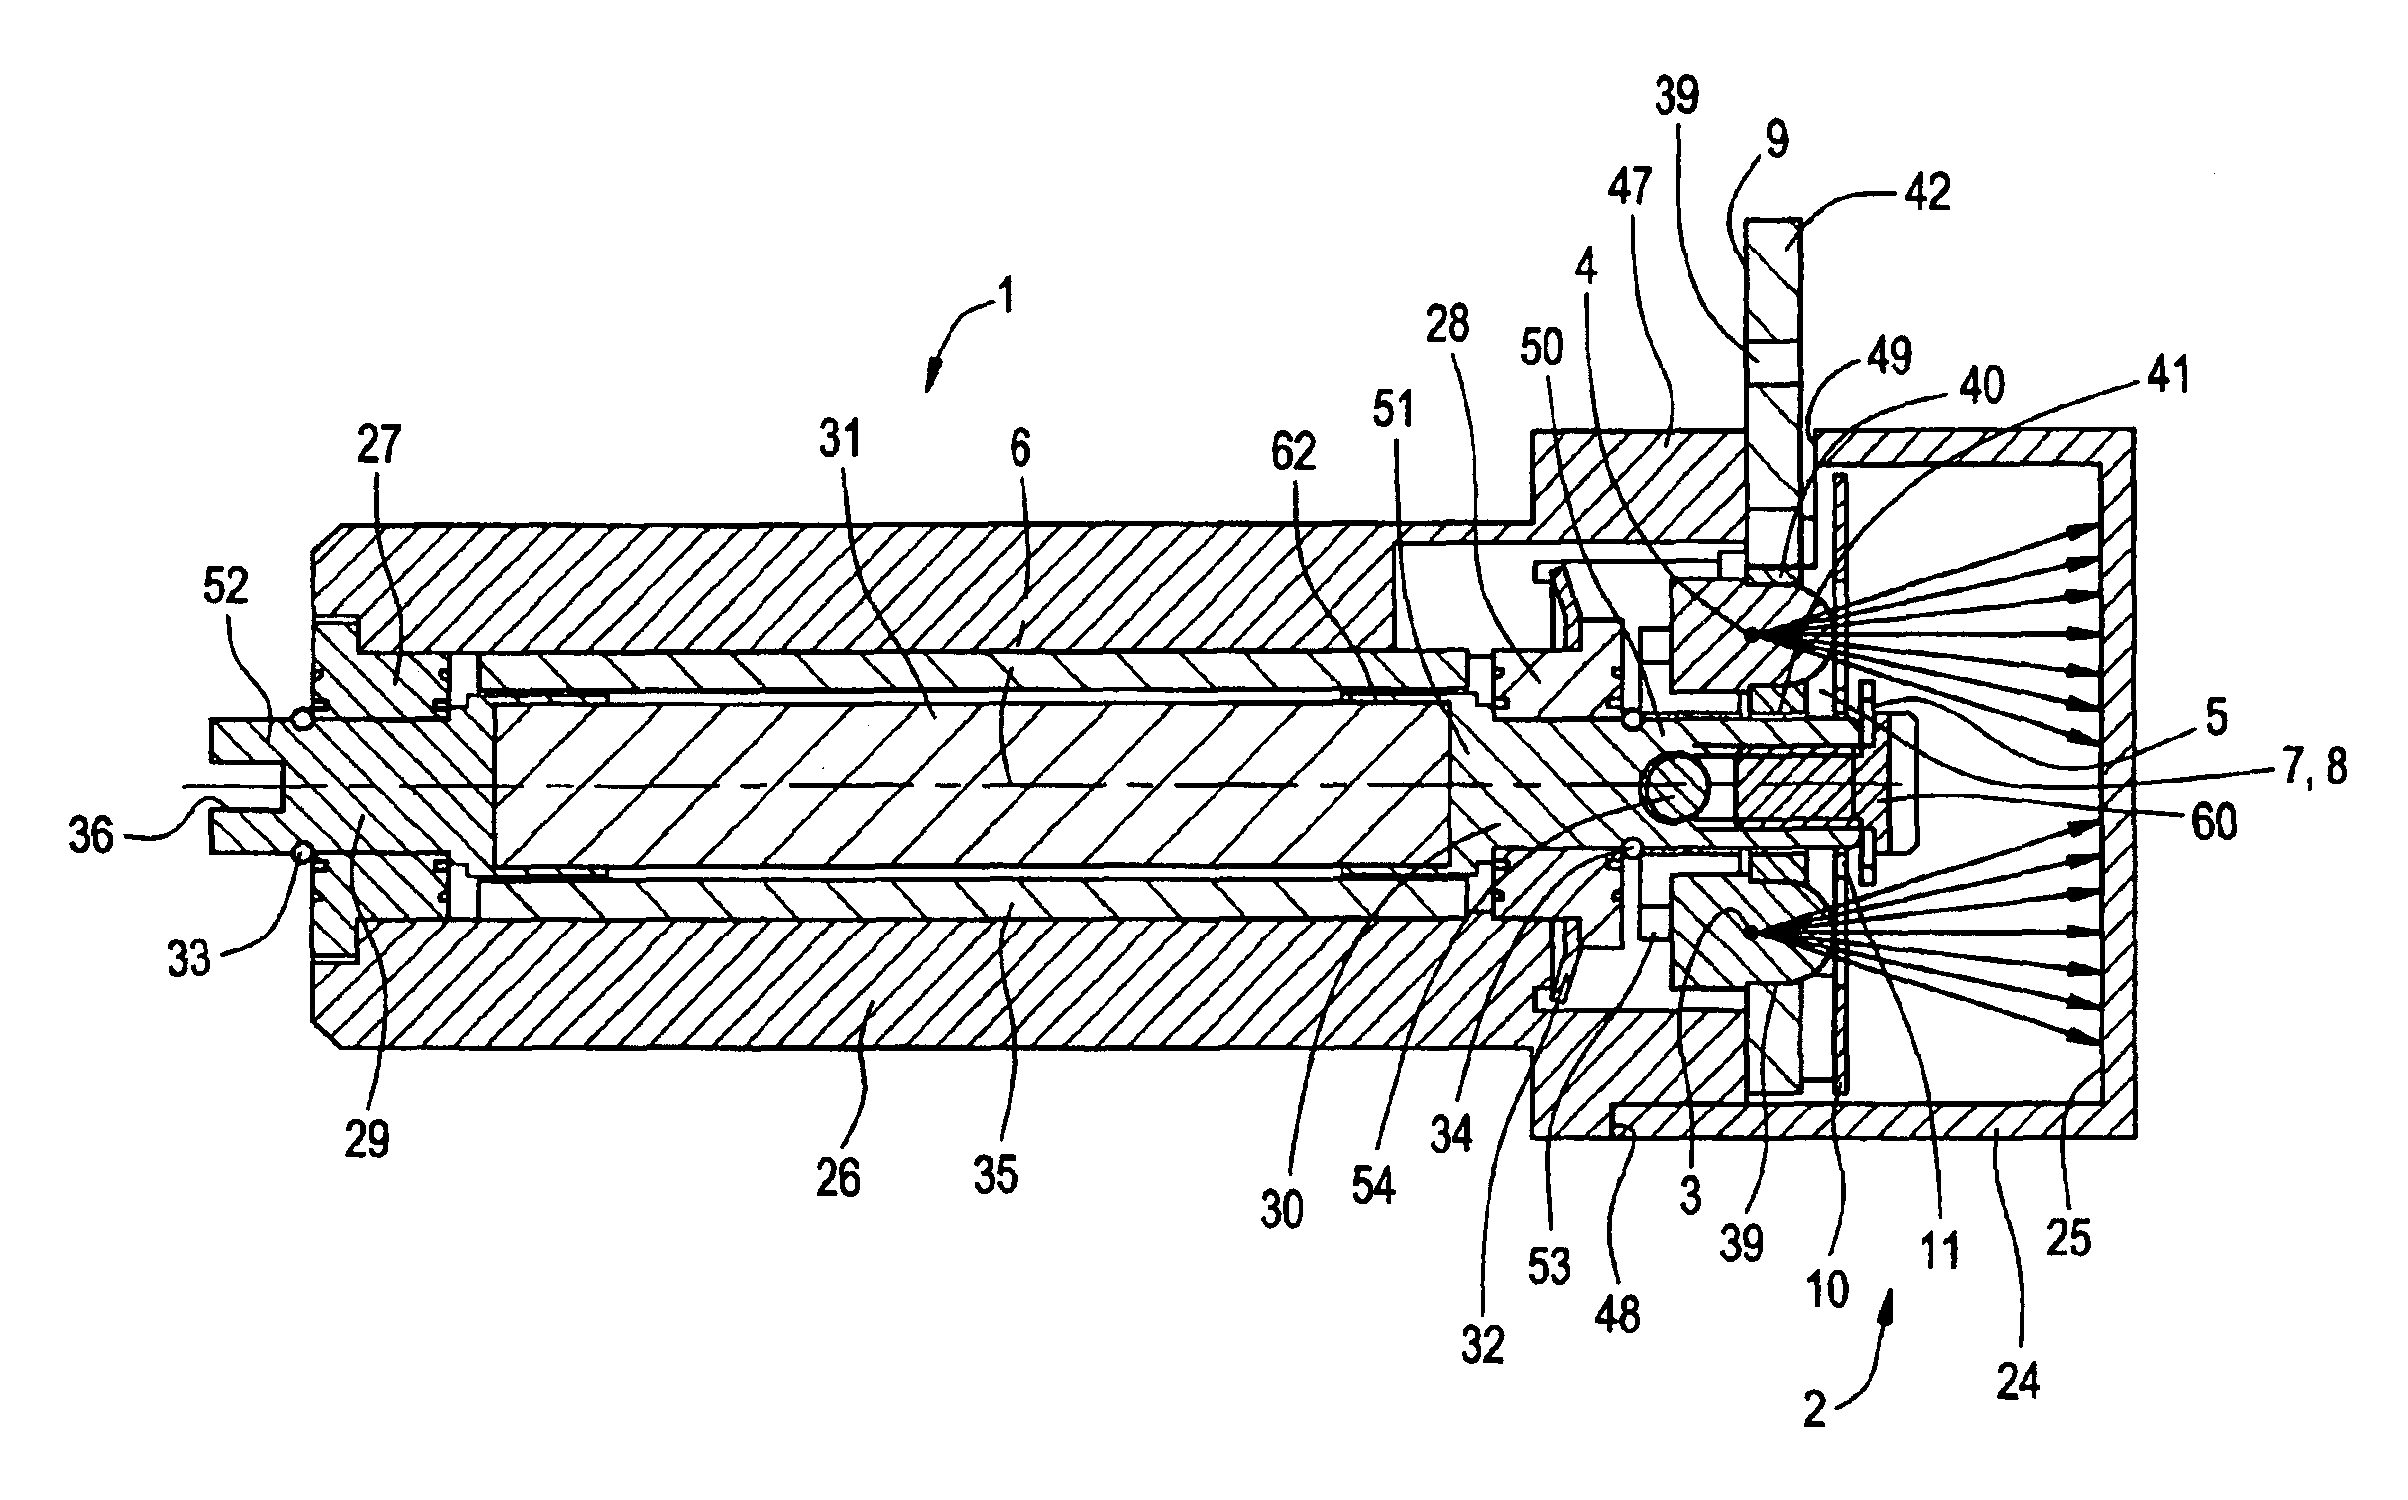 Position detector for a scanning device